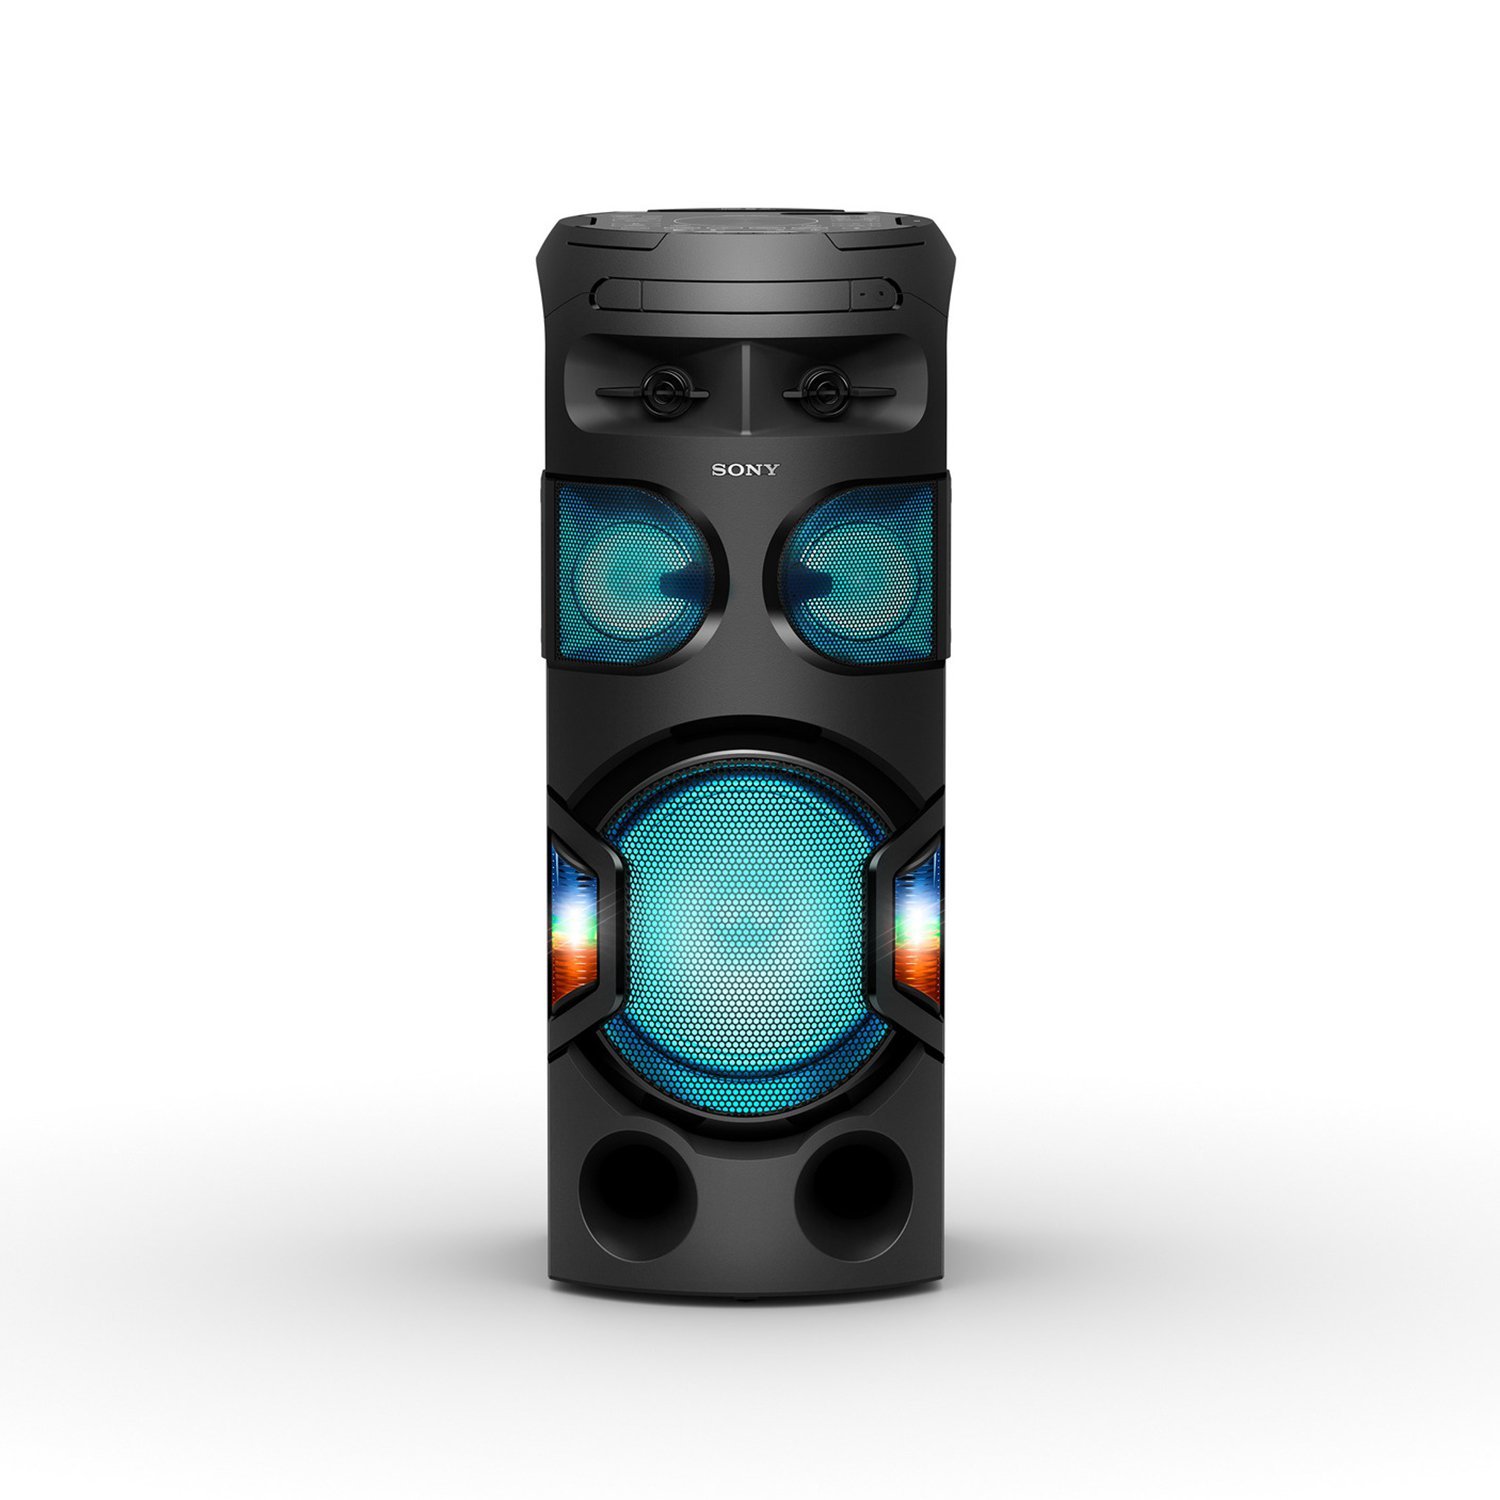 Amazon Offers – Samsung Multimedia Speaker System (Black) at Rs. 39880